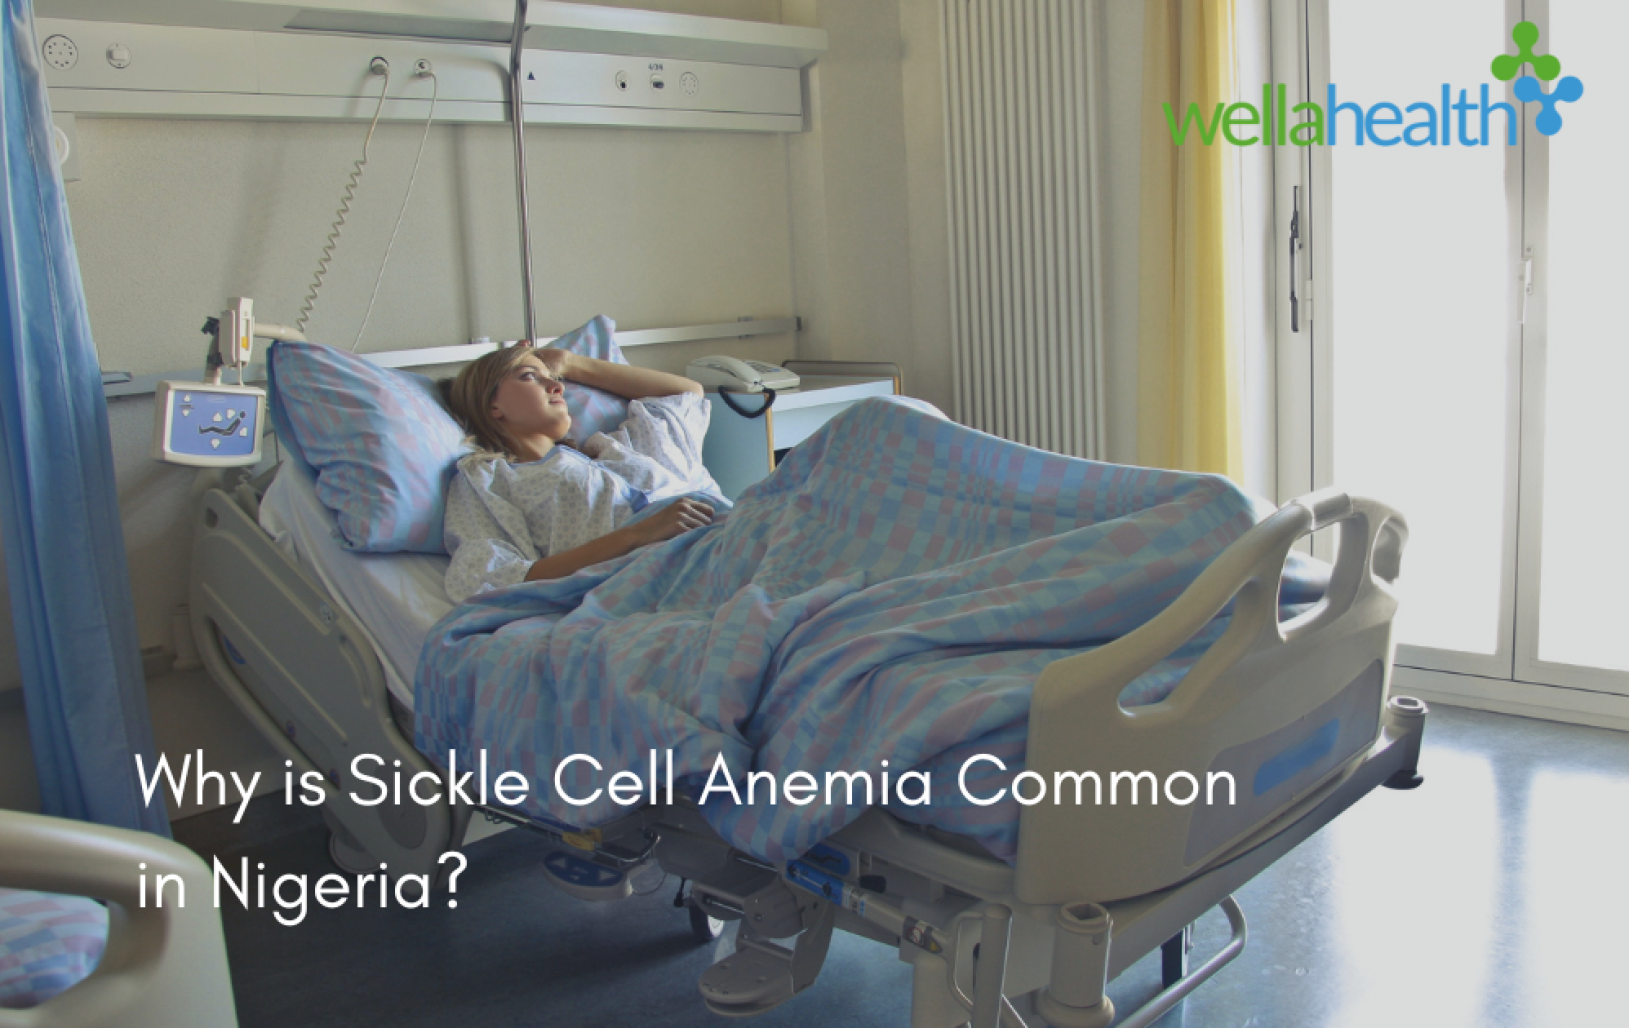 Sickle cell anemia in Nigeria